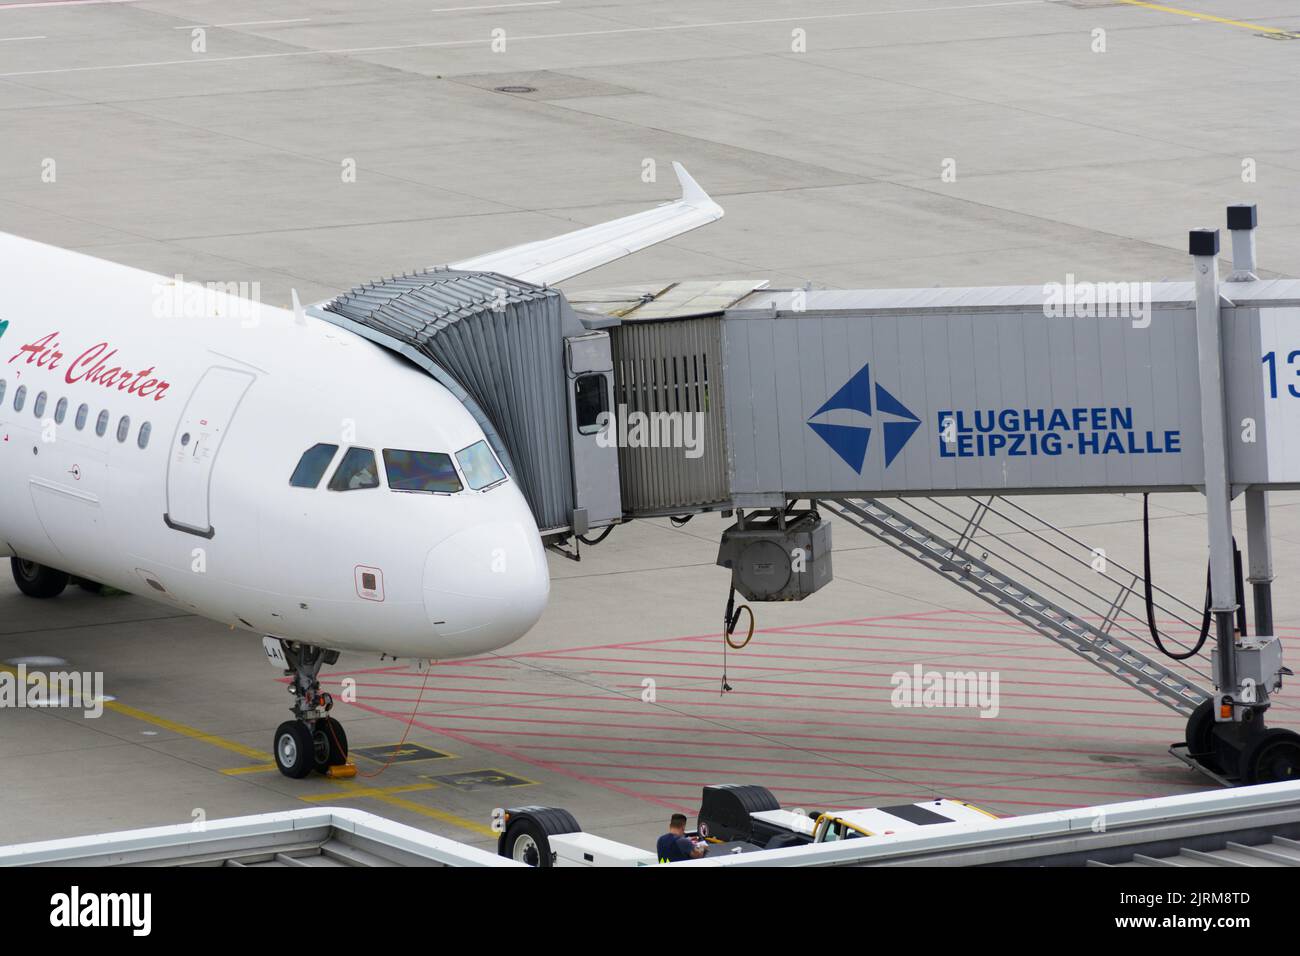 Germany, August 25, 2022: Gangway at passenger aircraft at Leipzig-Halle Airport Stock Photo